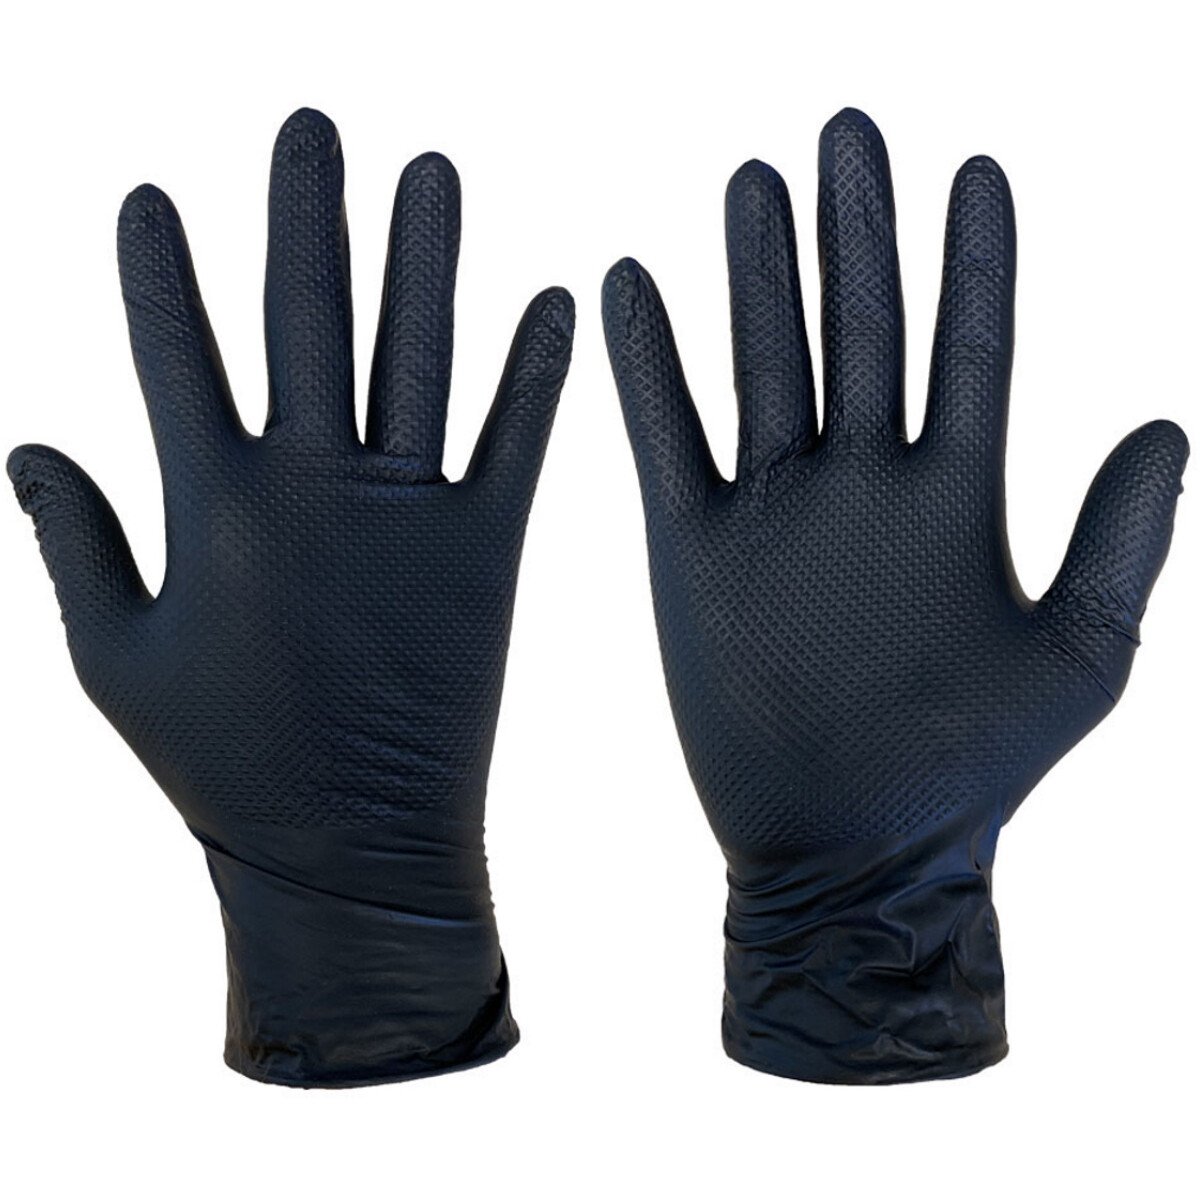 Mercator Ideall GRIP Black Nitrile Gloves Touch Screen Multi-Use ...